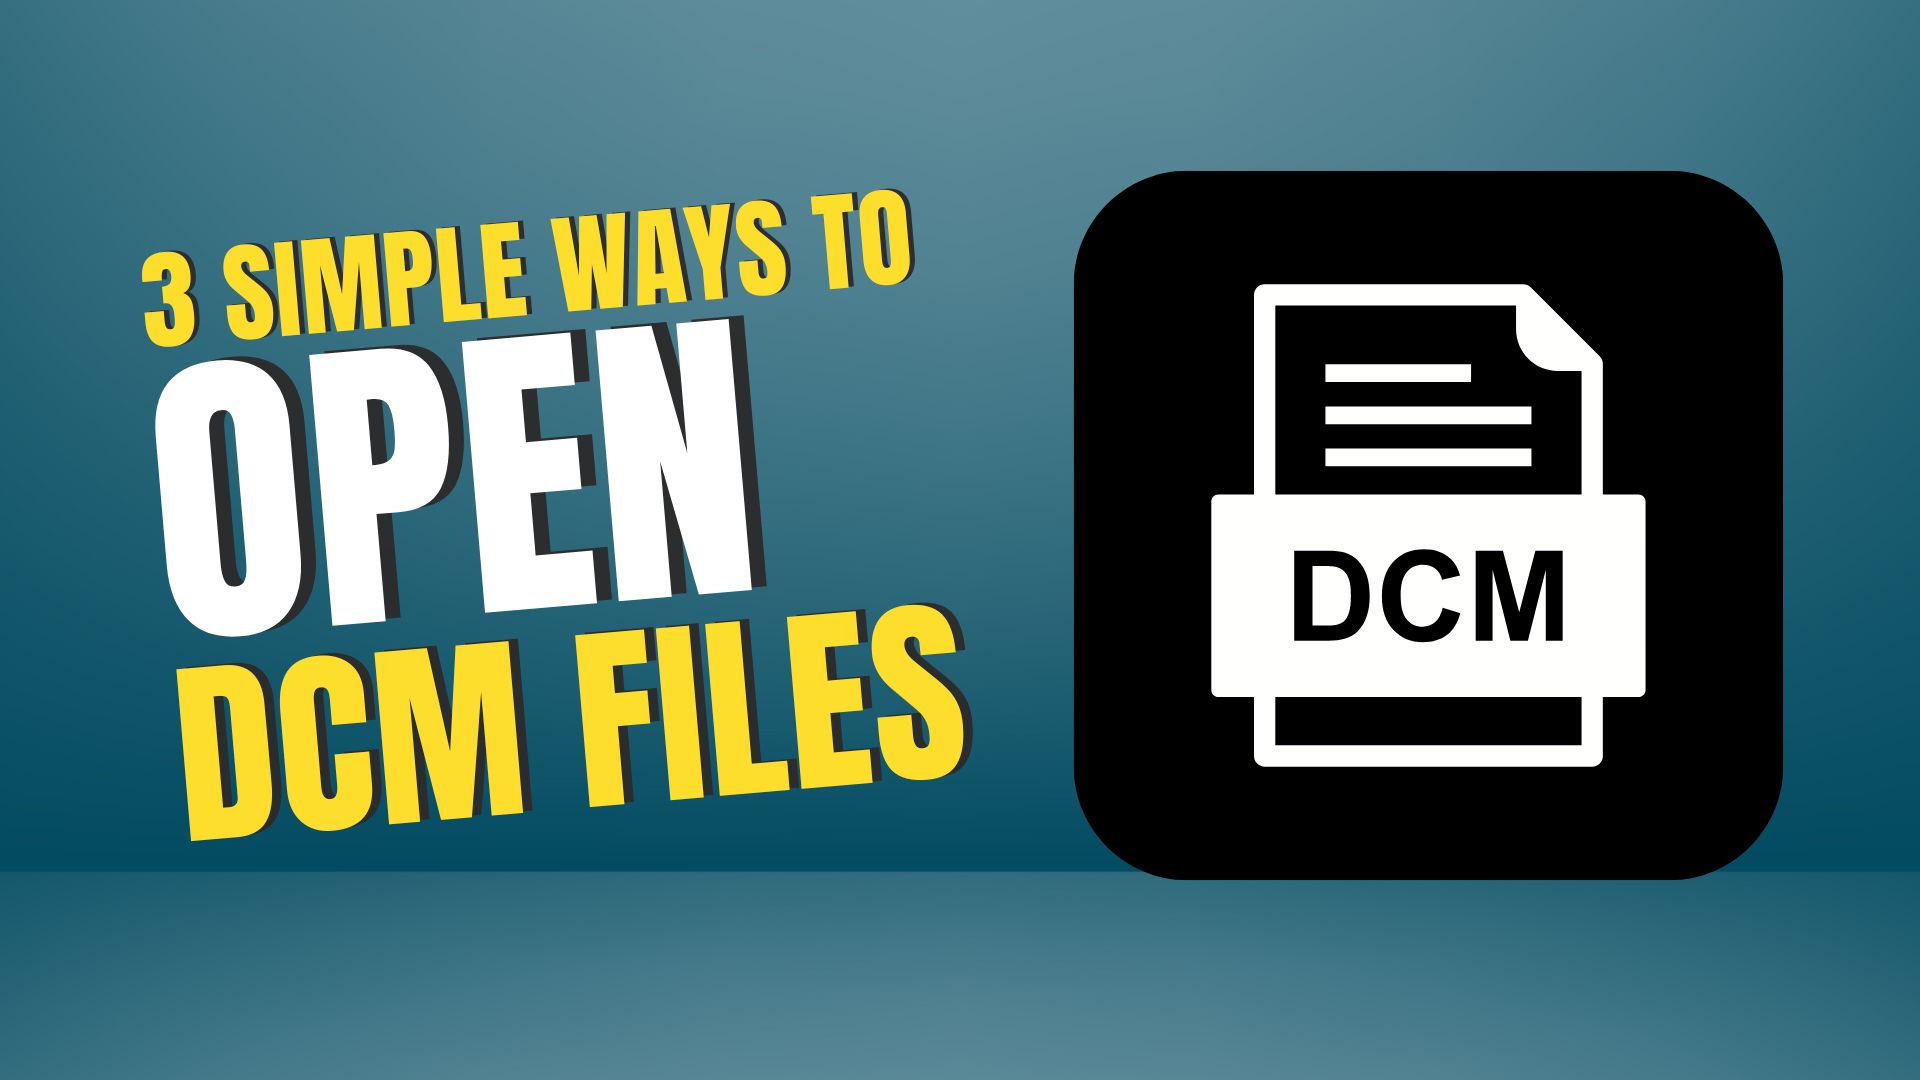 How to Open DCM Files